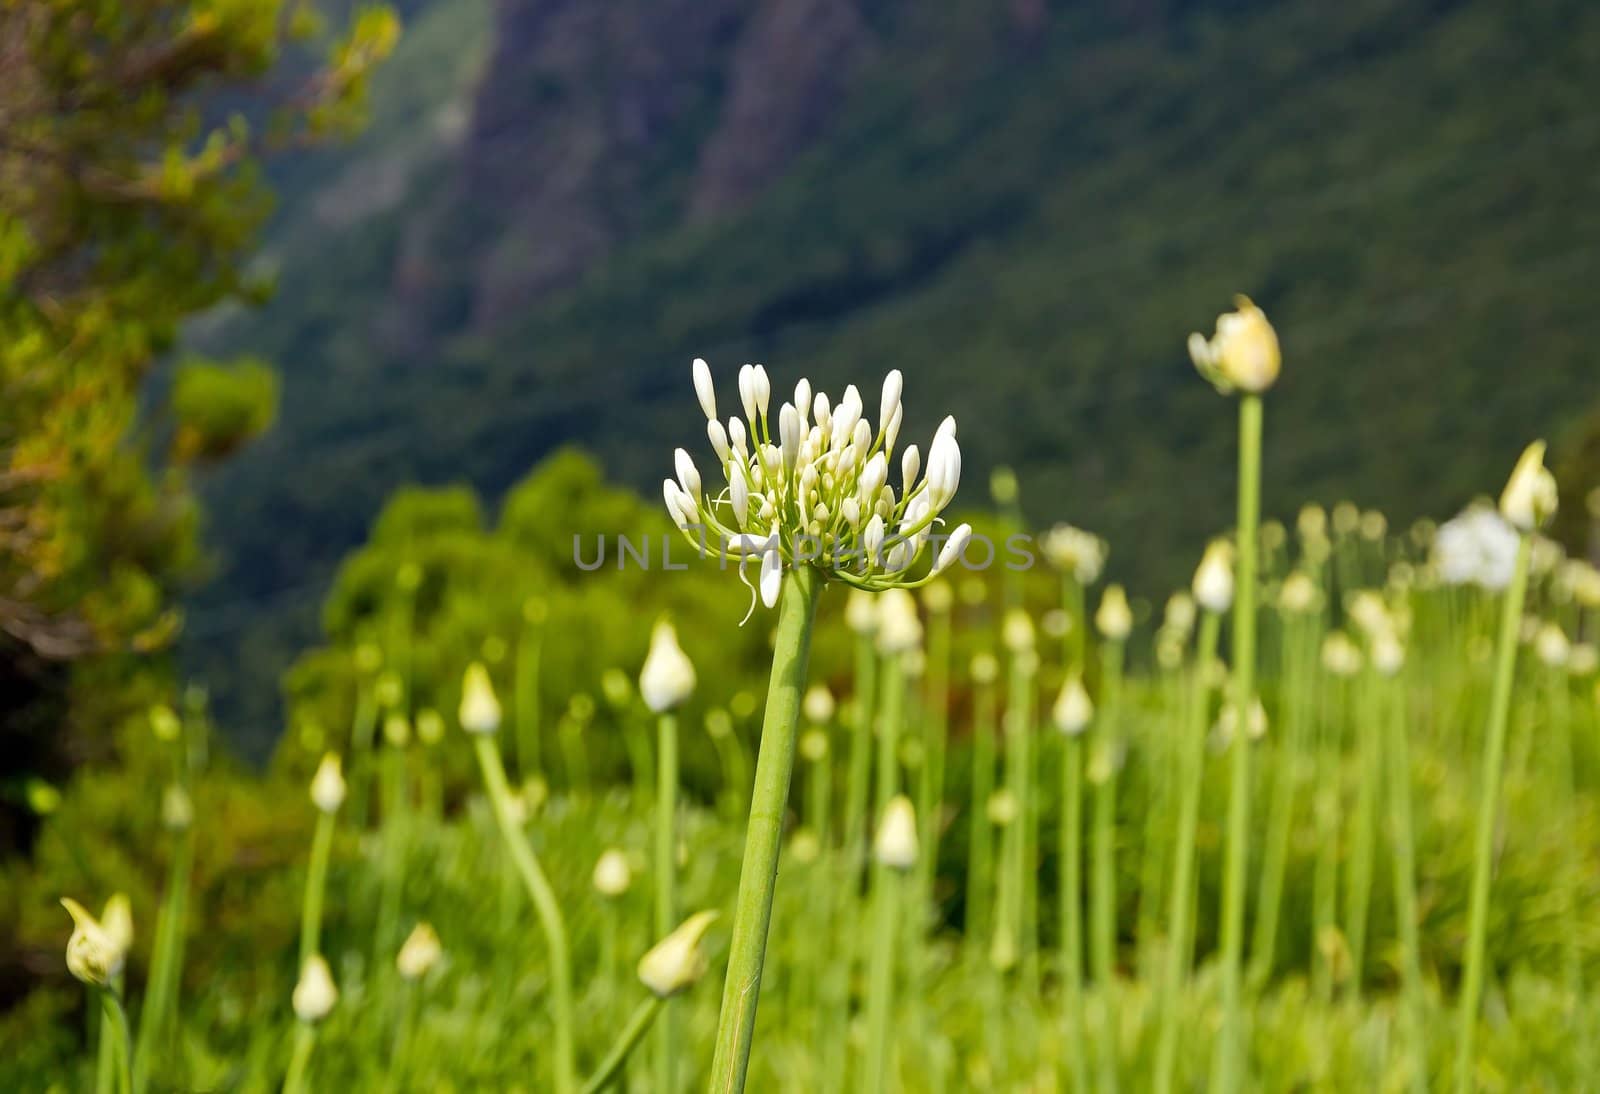 some Agapanthus, from the island of Madeira by neko92vl